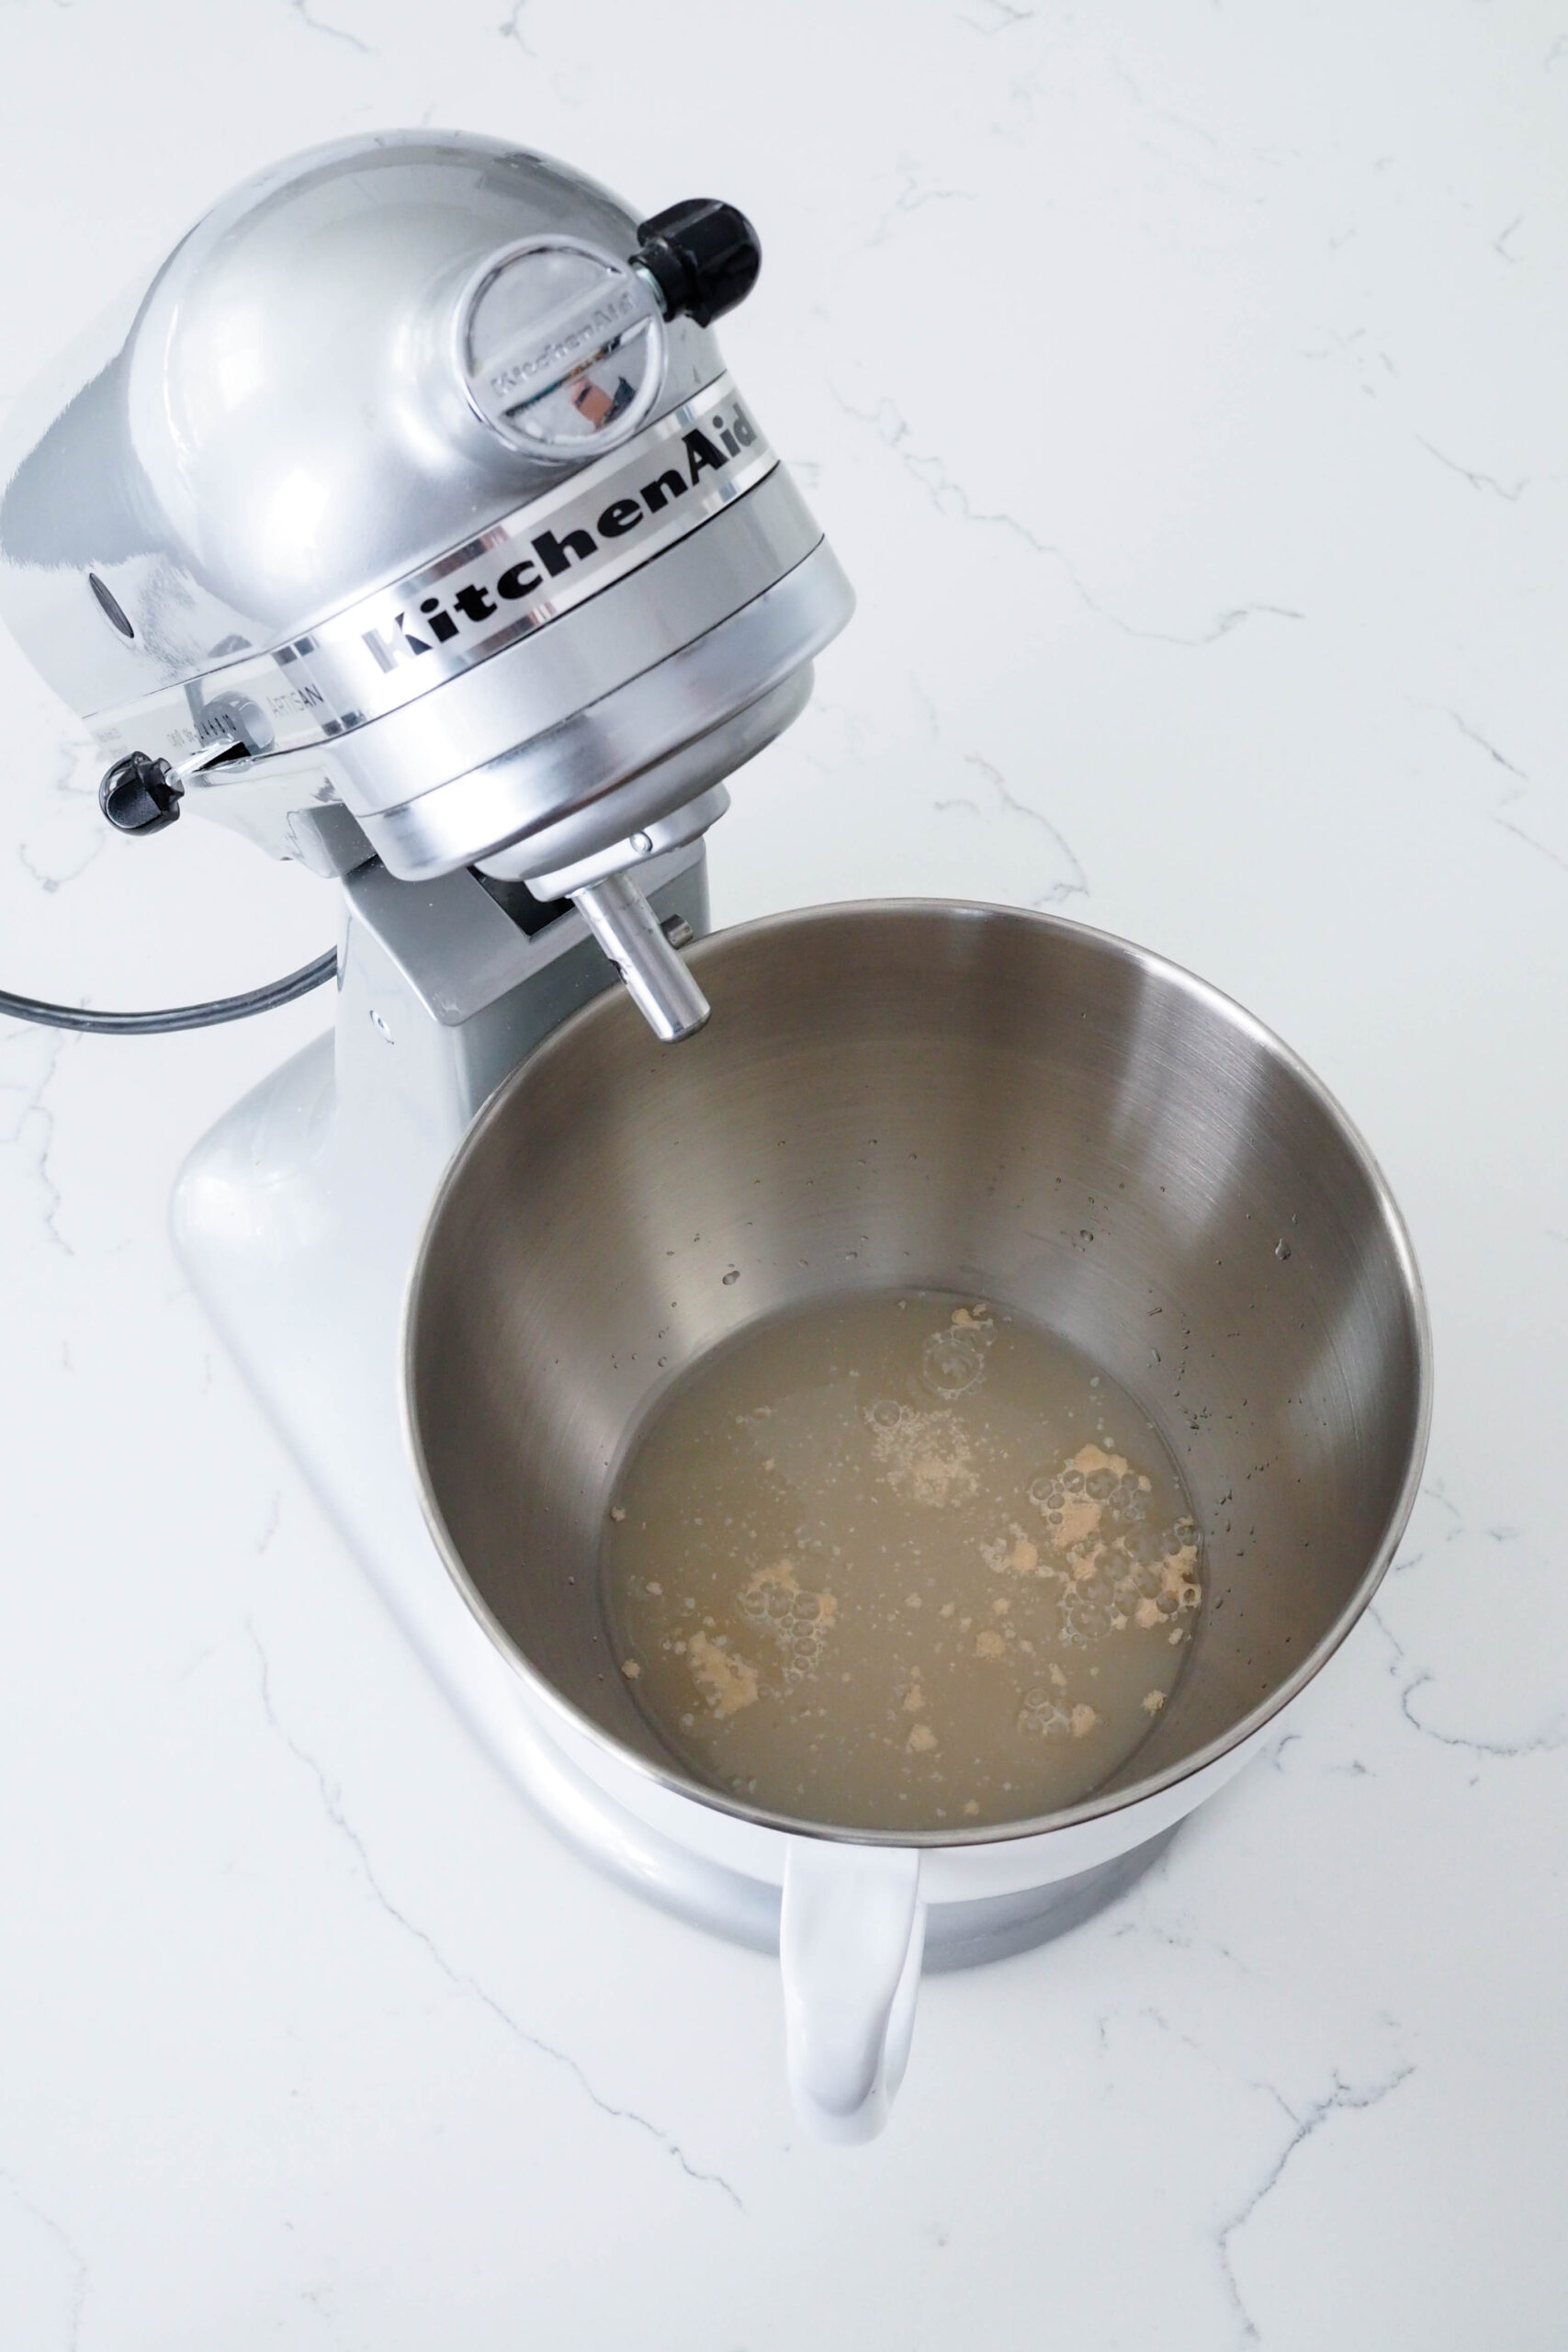 Yeast dissolves in water in a stand mixer bowl.